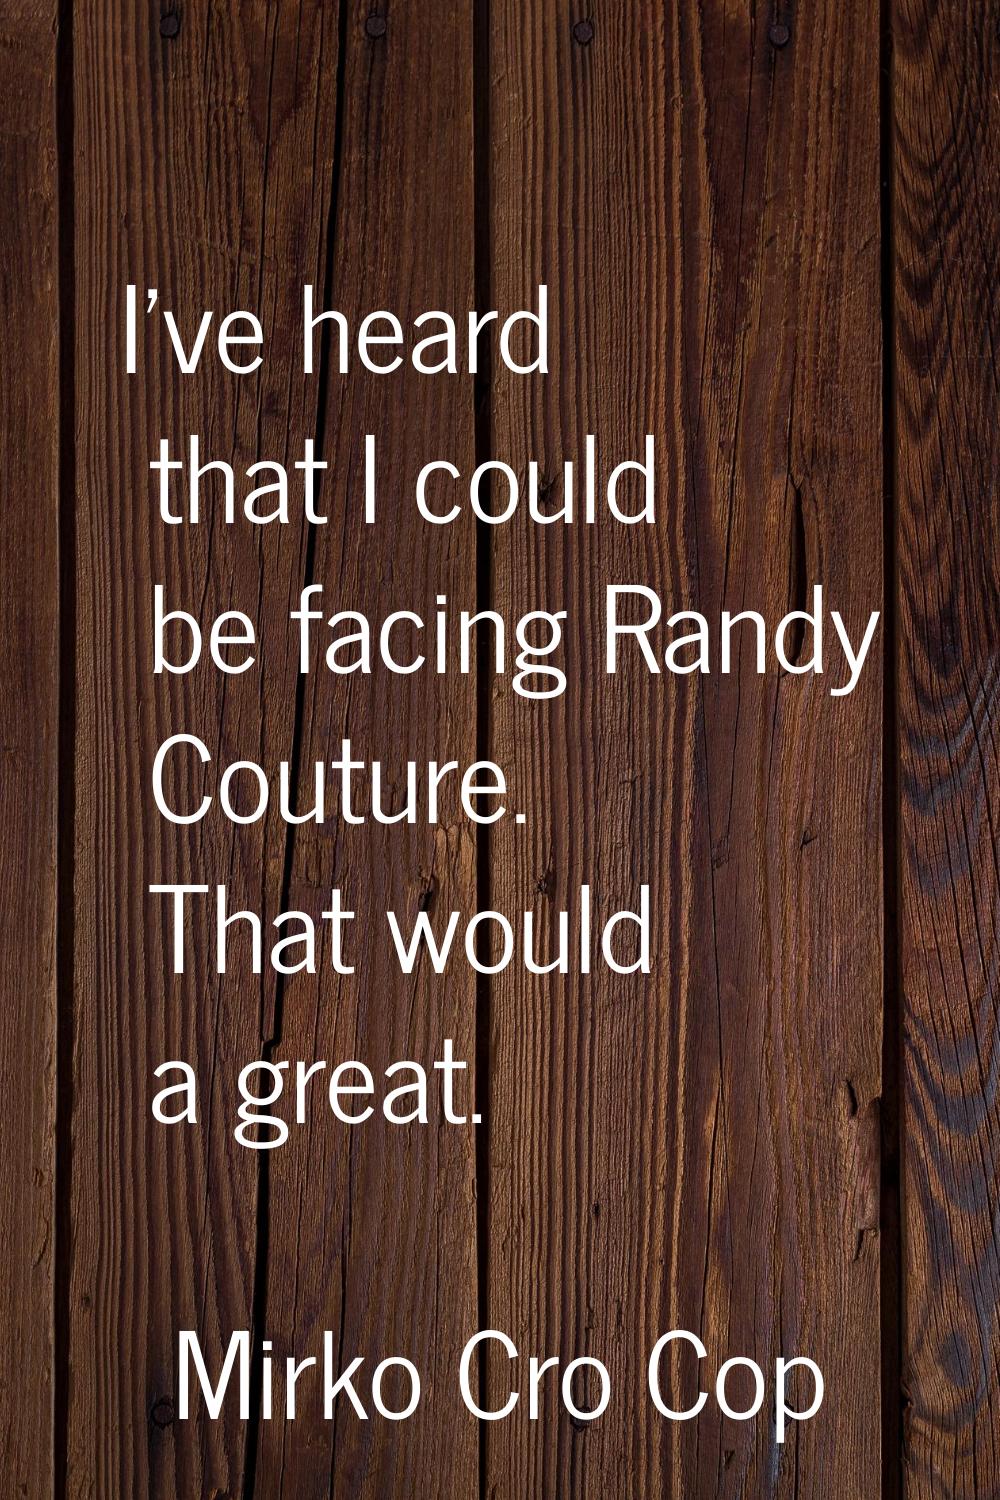 I've heard that I could be facing Randy Couture. That would a great.